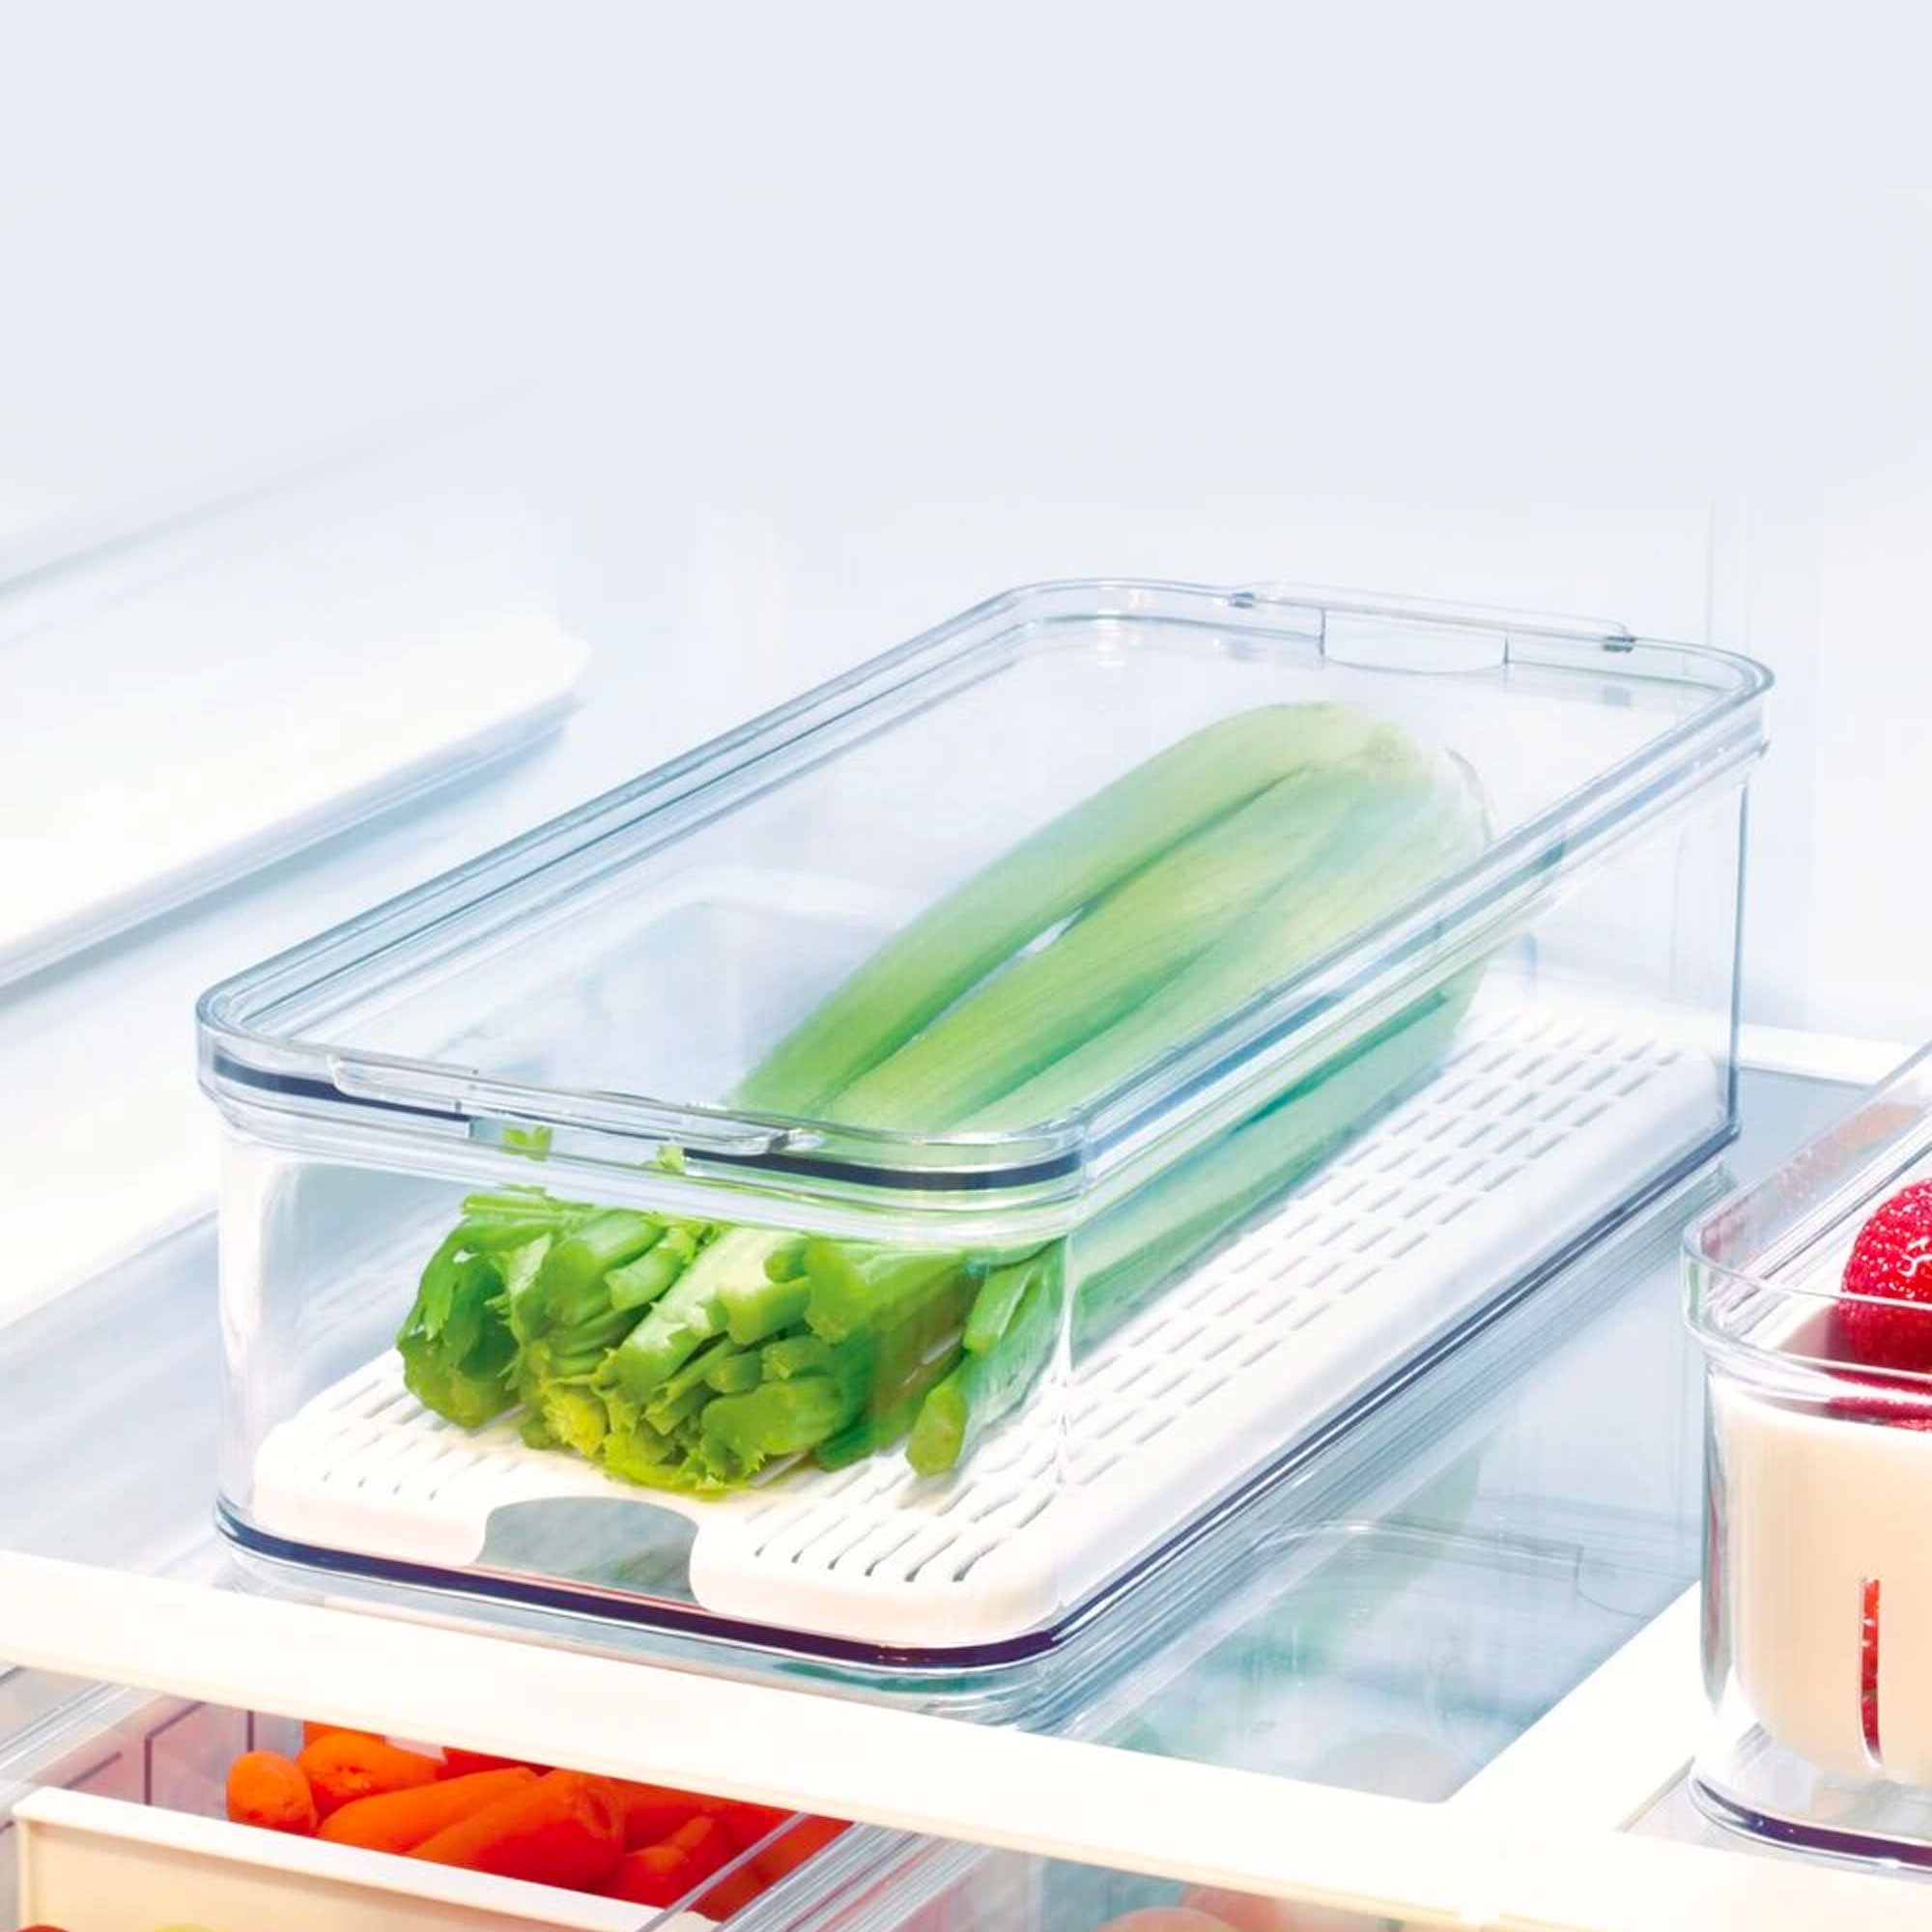 iDesign Crisp Produce Bin with Lid Clear Image 2